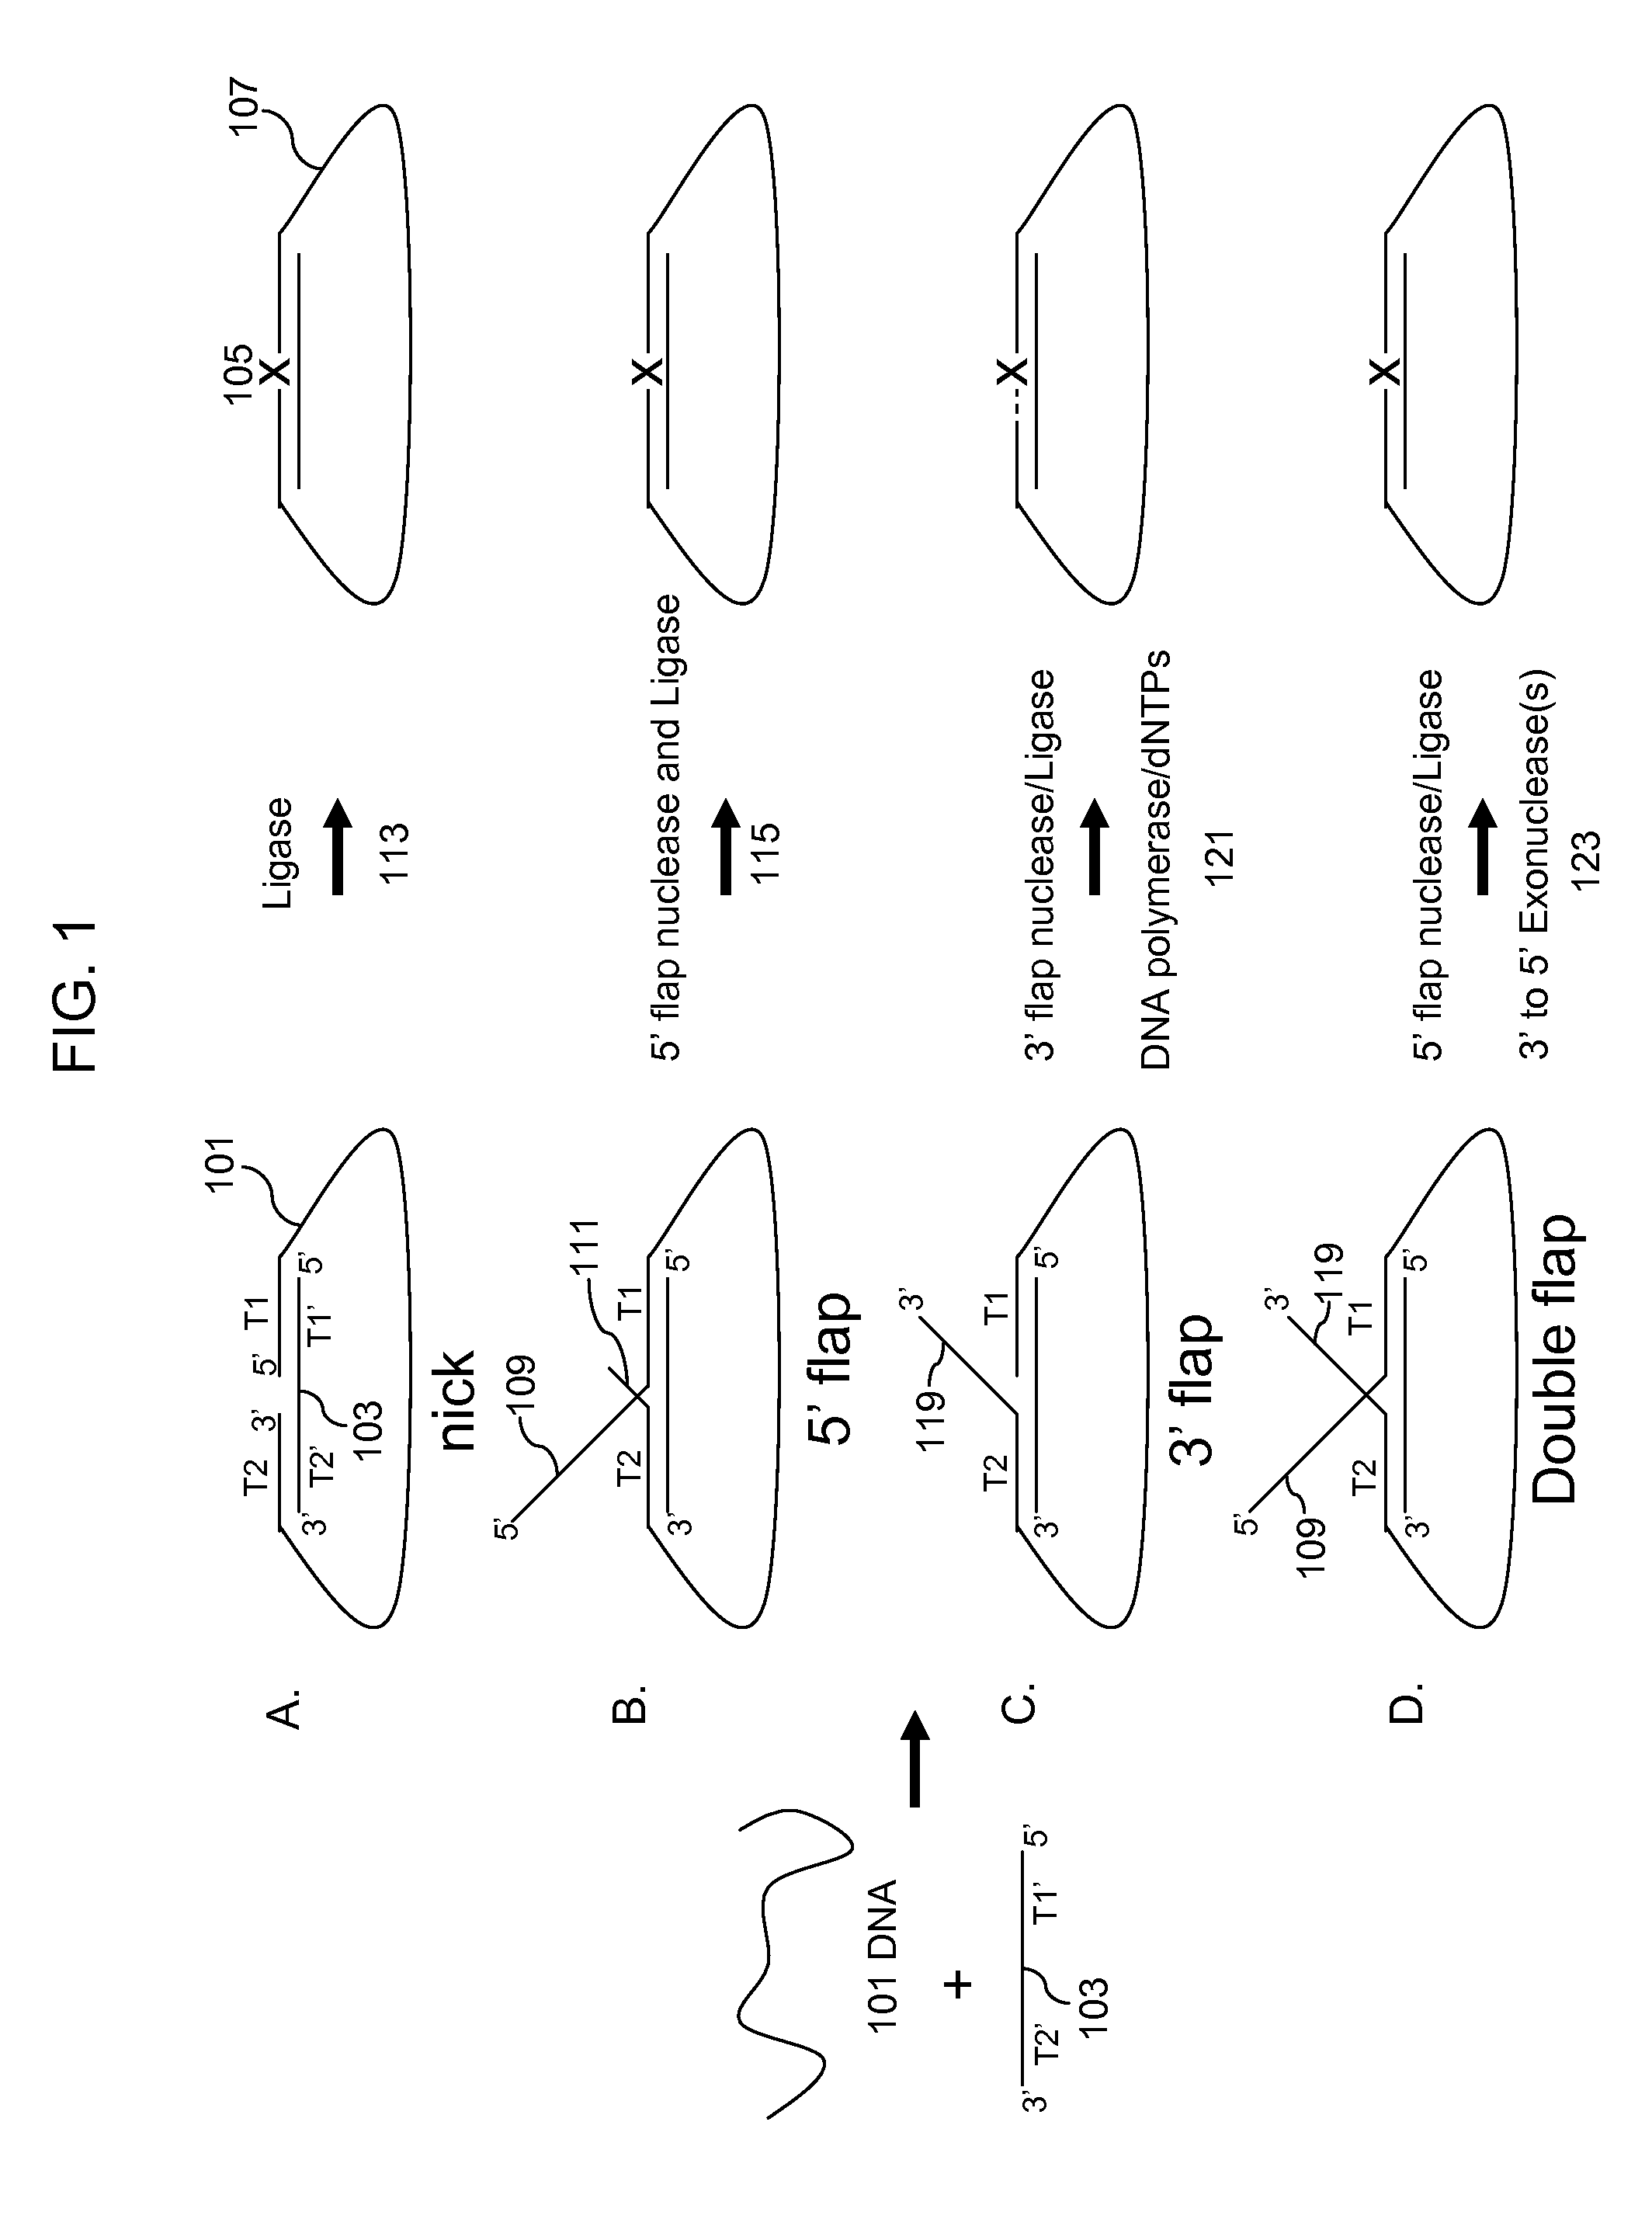 Multiplex targeted amplification using flap nuclease